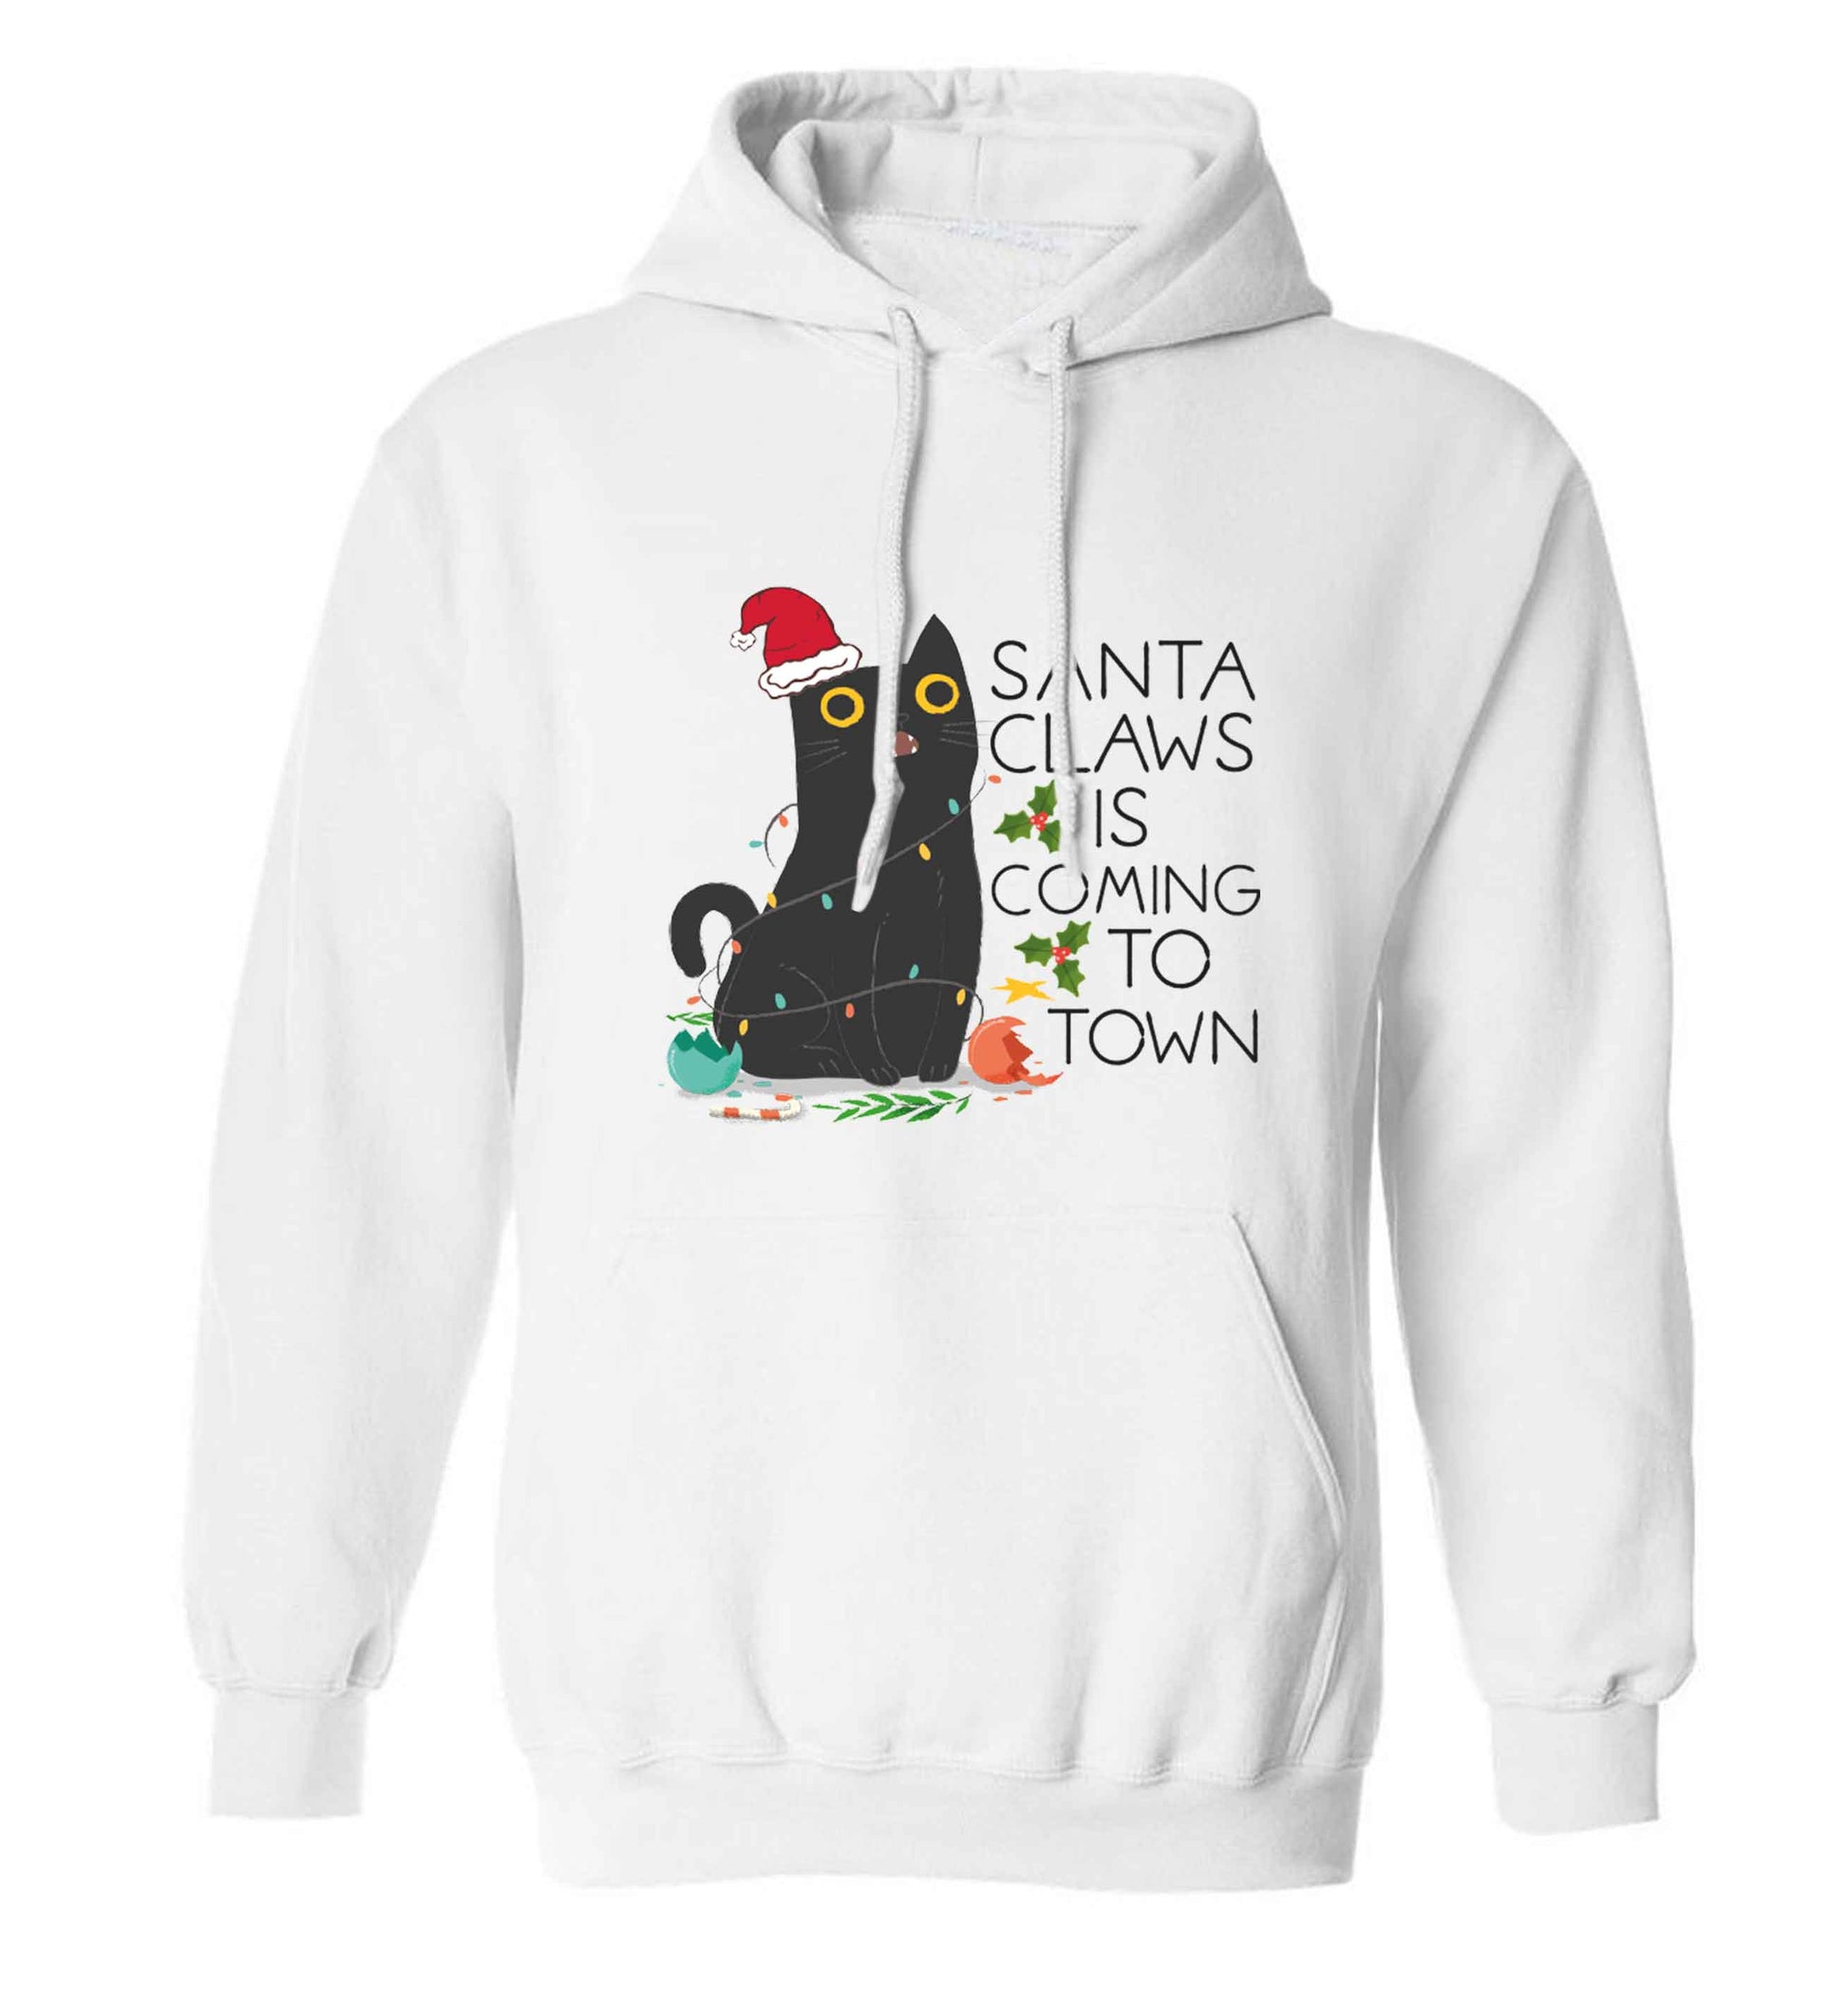 Santa claws is coming to town  adults unisex white hoodie 2XL